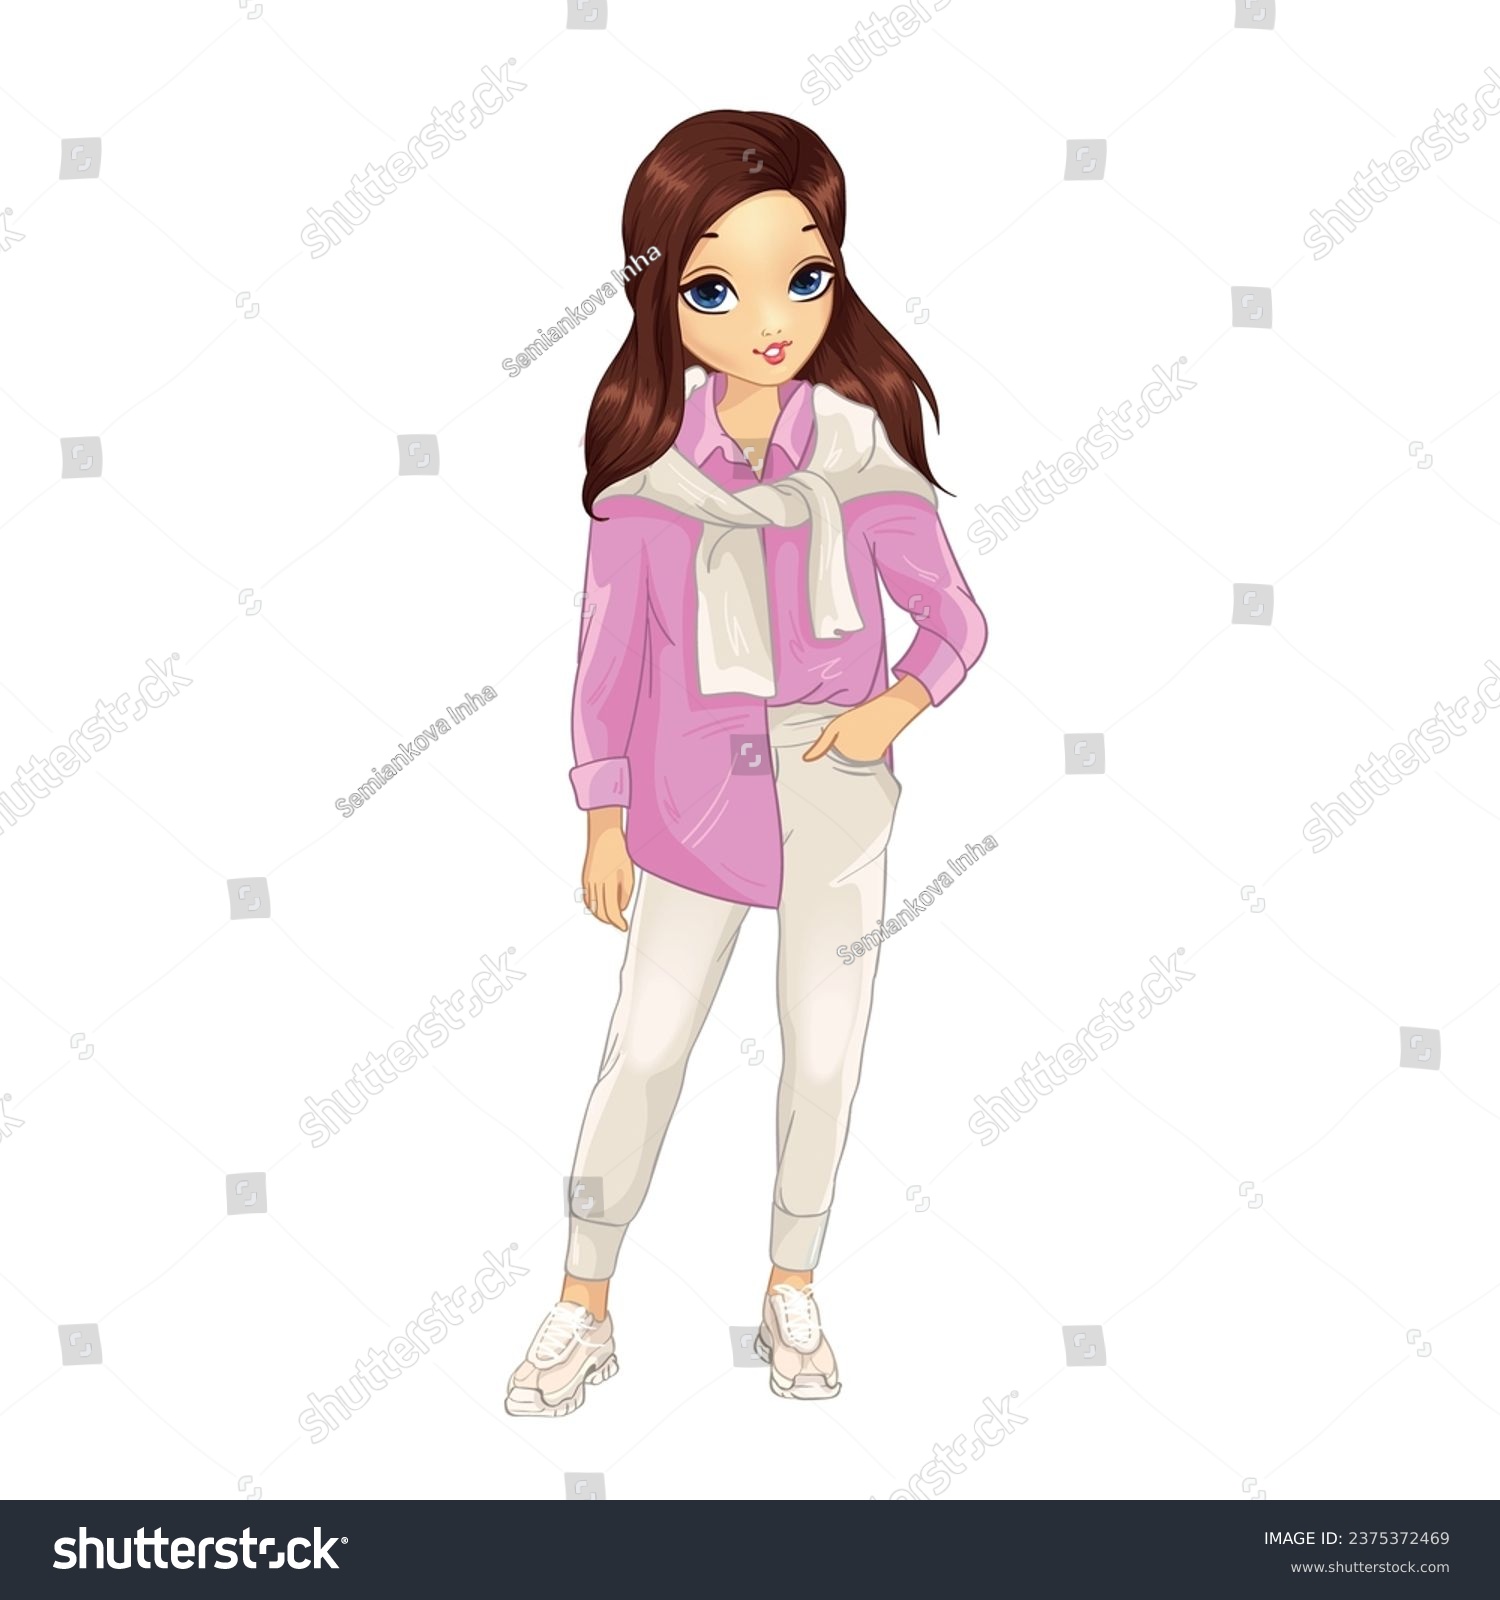 SVG of Girl dressed in pink shirt and white tracksuit svg